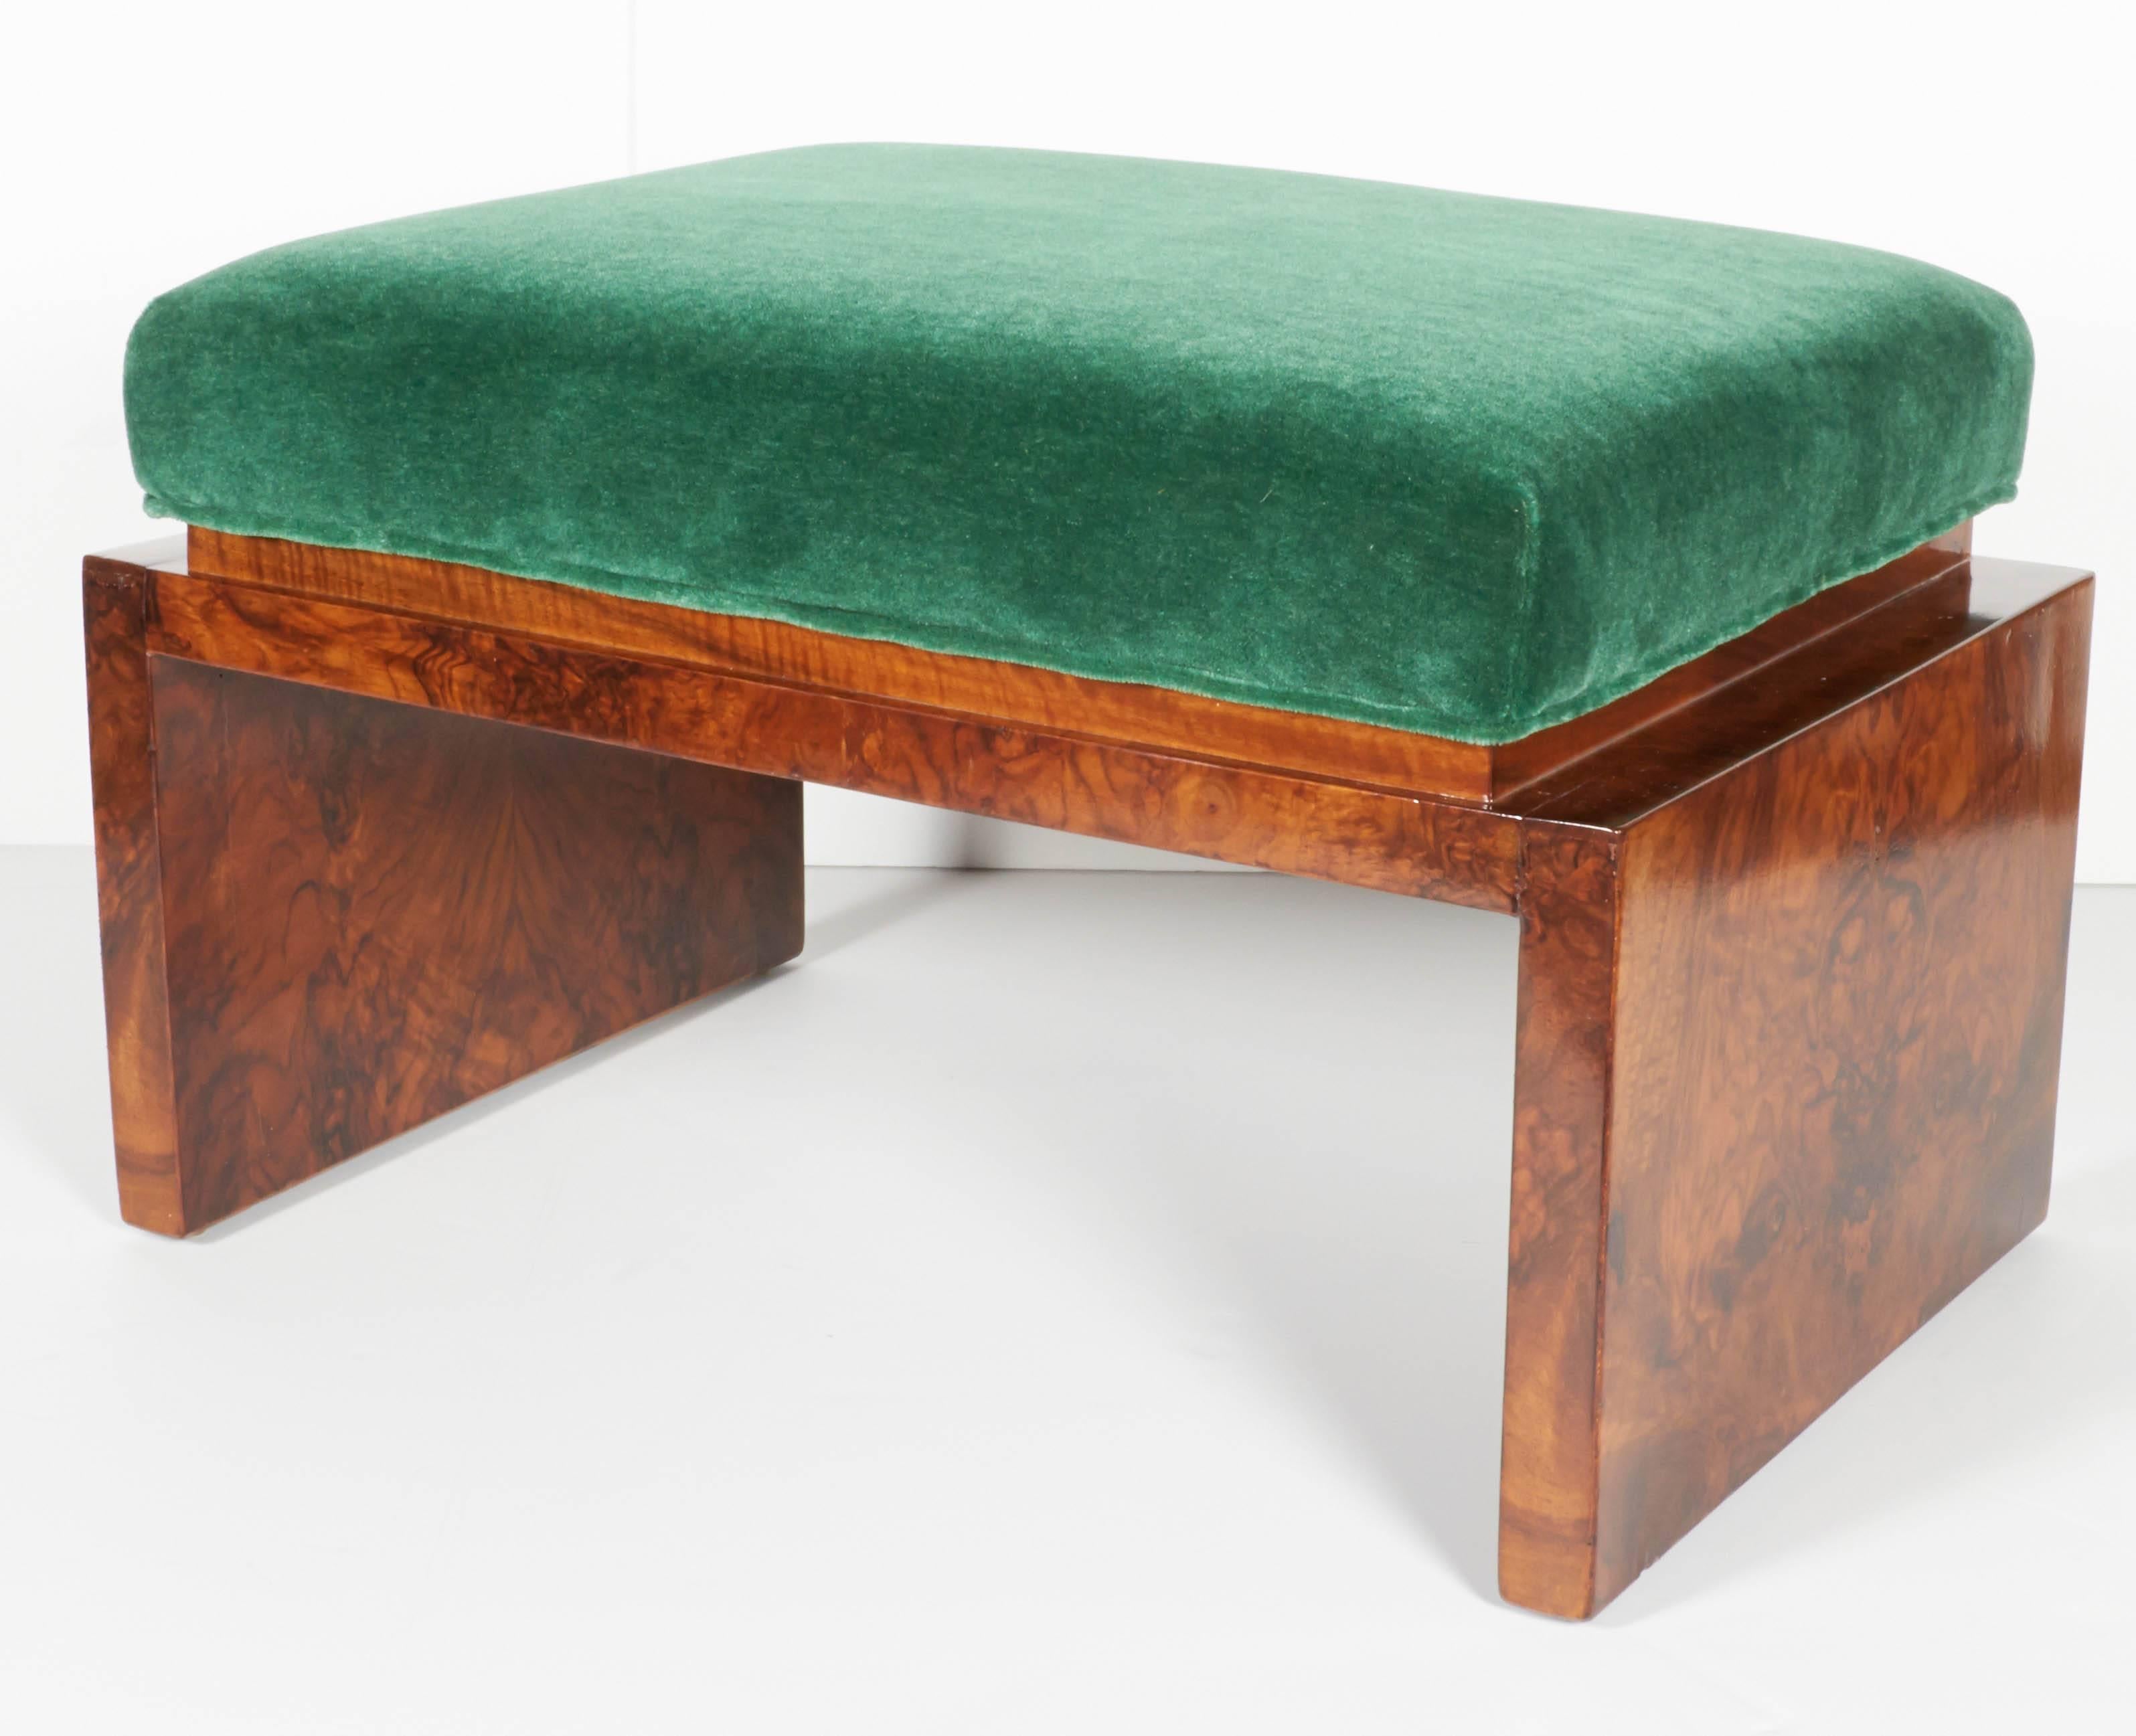 Rare Art Deco Low Benches in Emerald Mohair and Burled Carpathian Elm 1